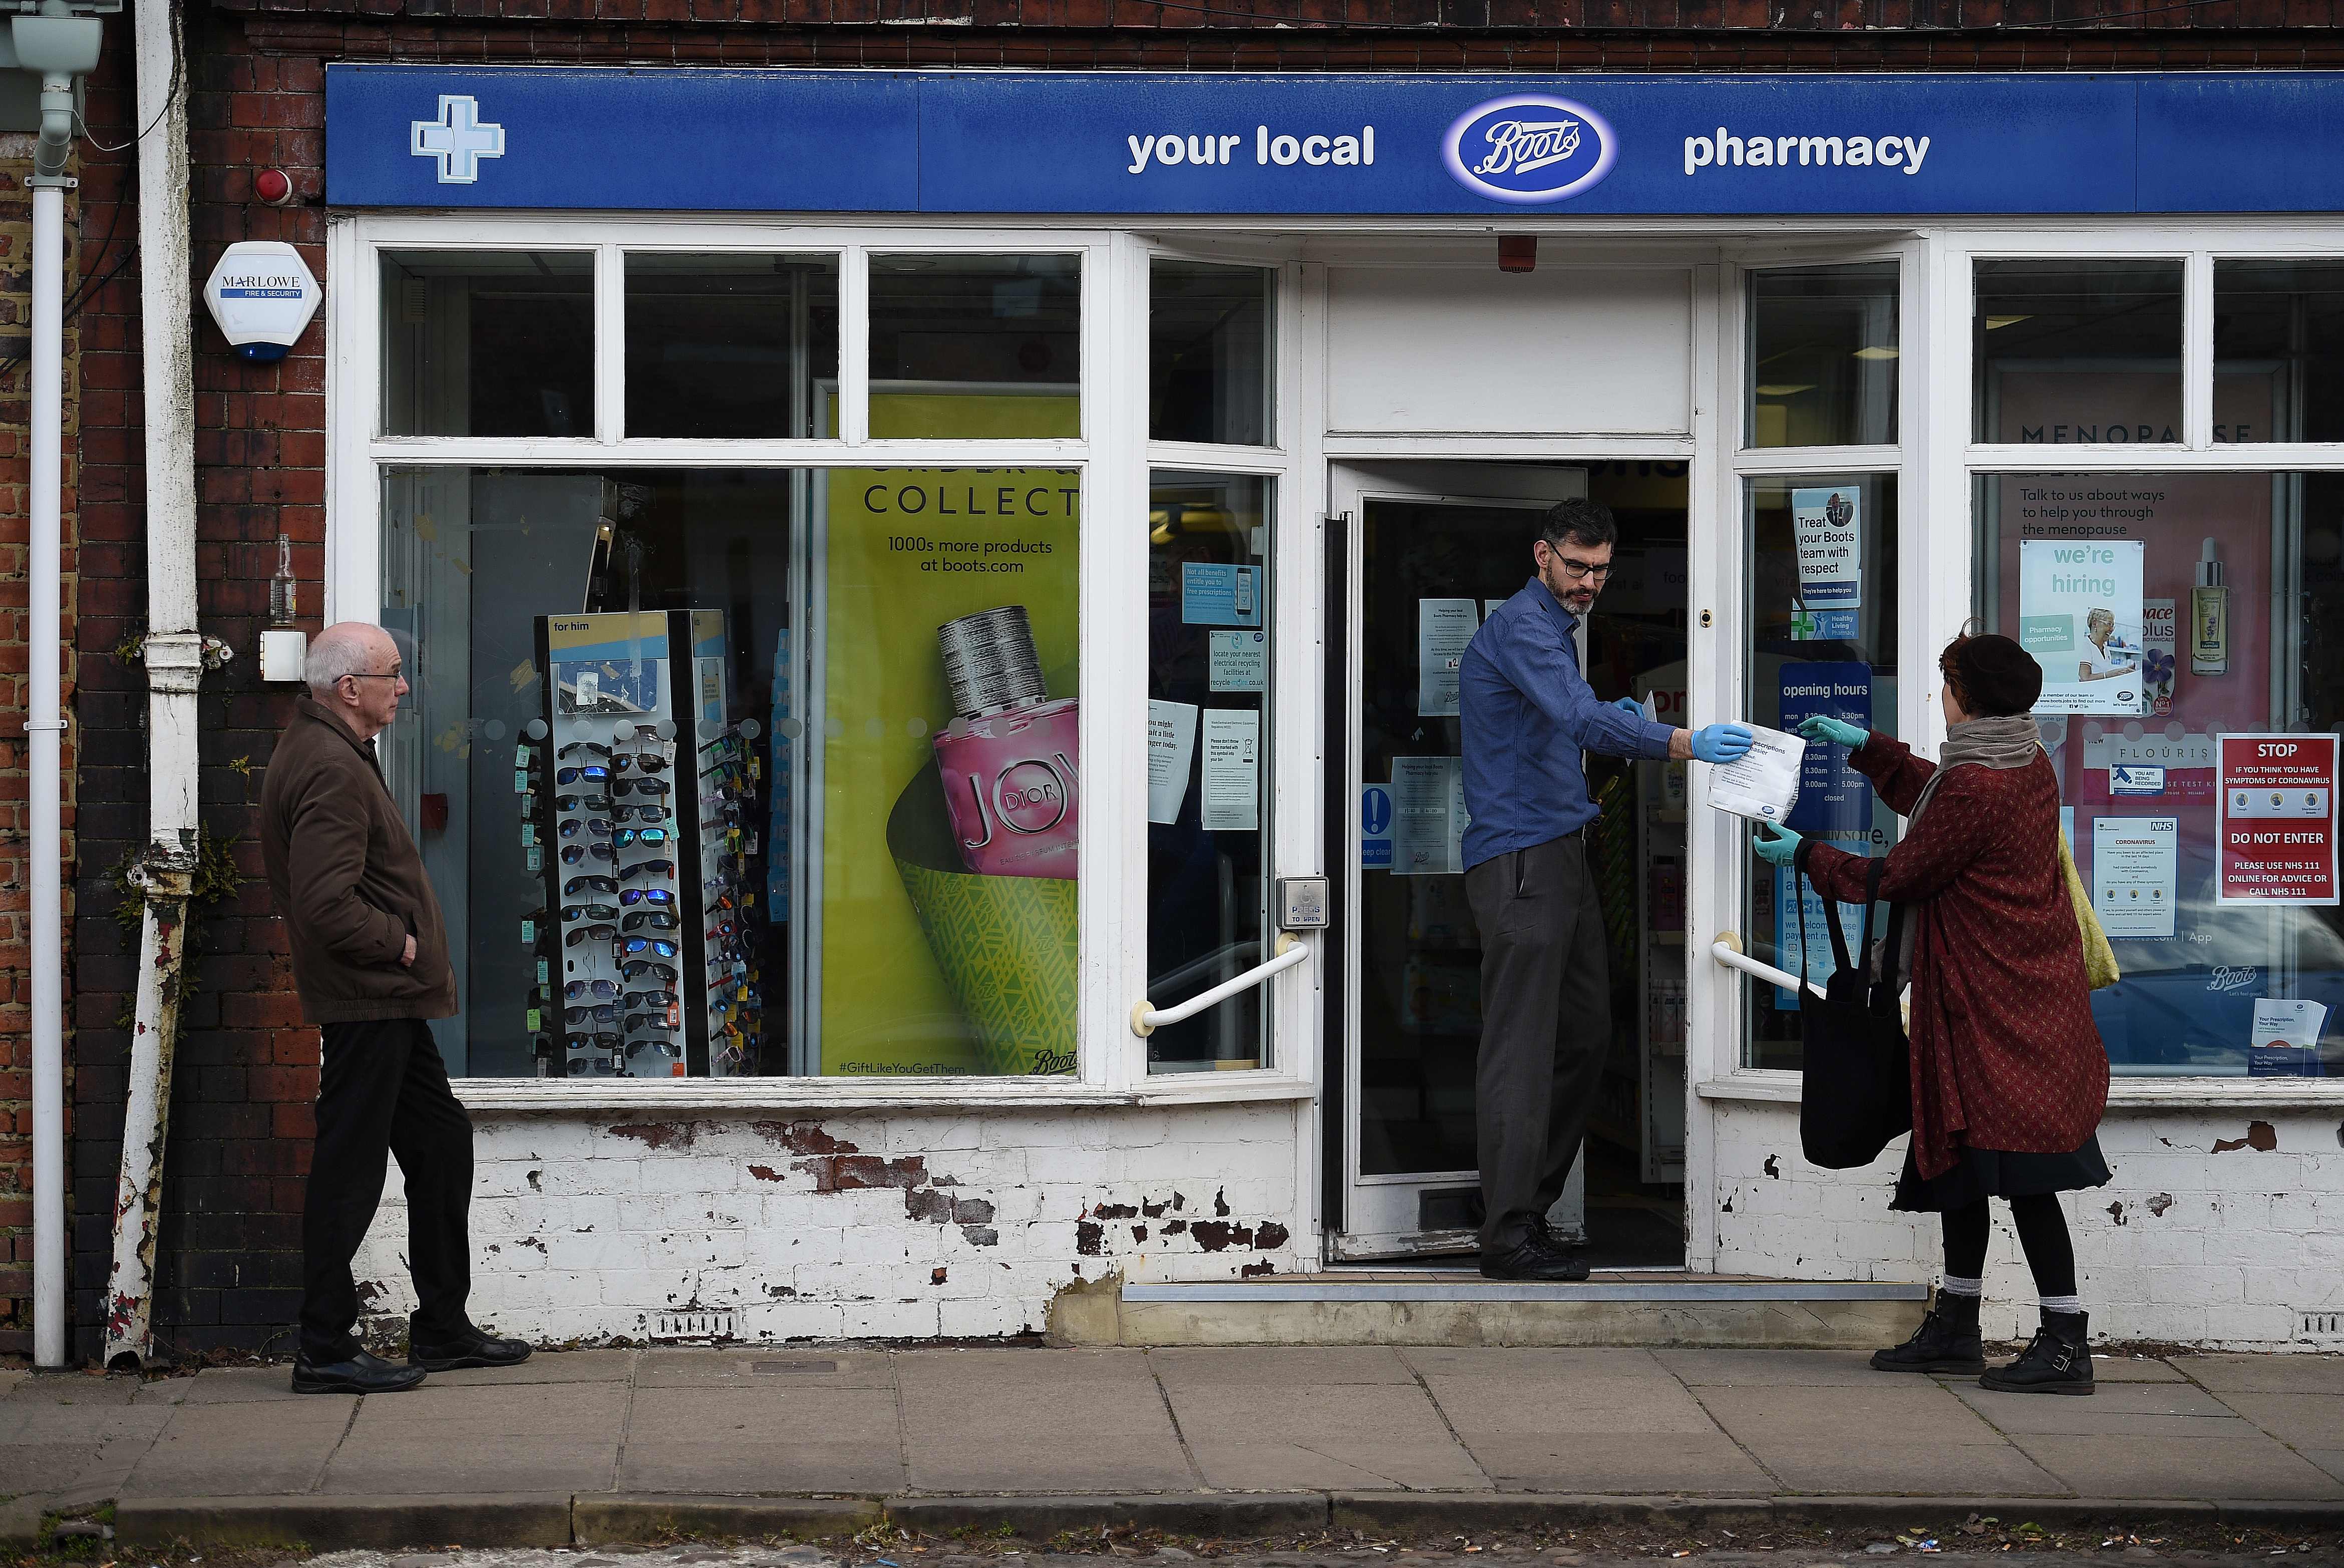 Boots has stopped offering flu vaccines to under-65s due to record demand